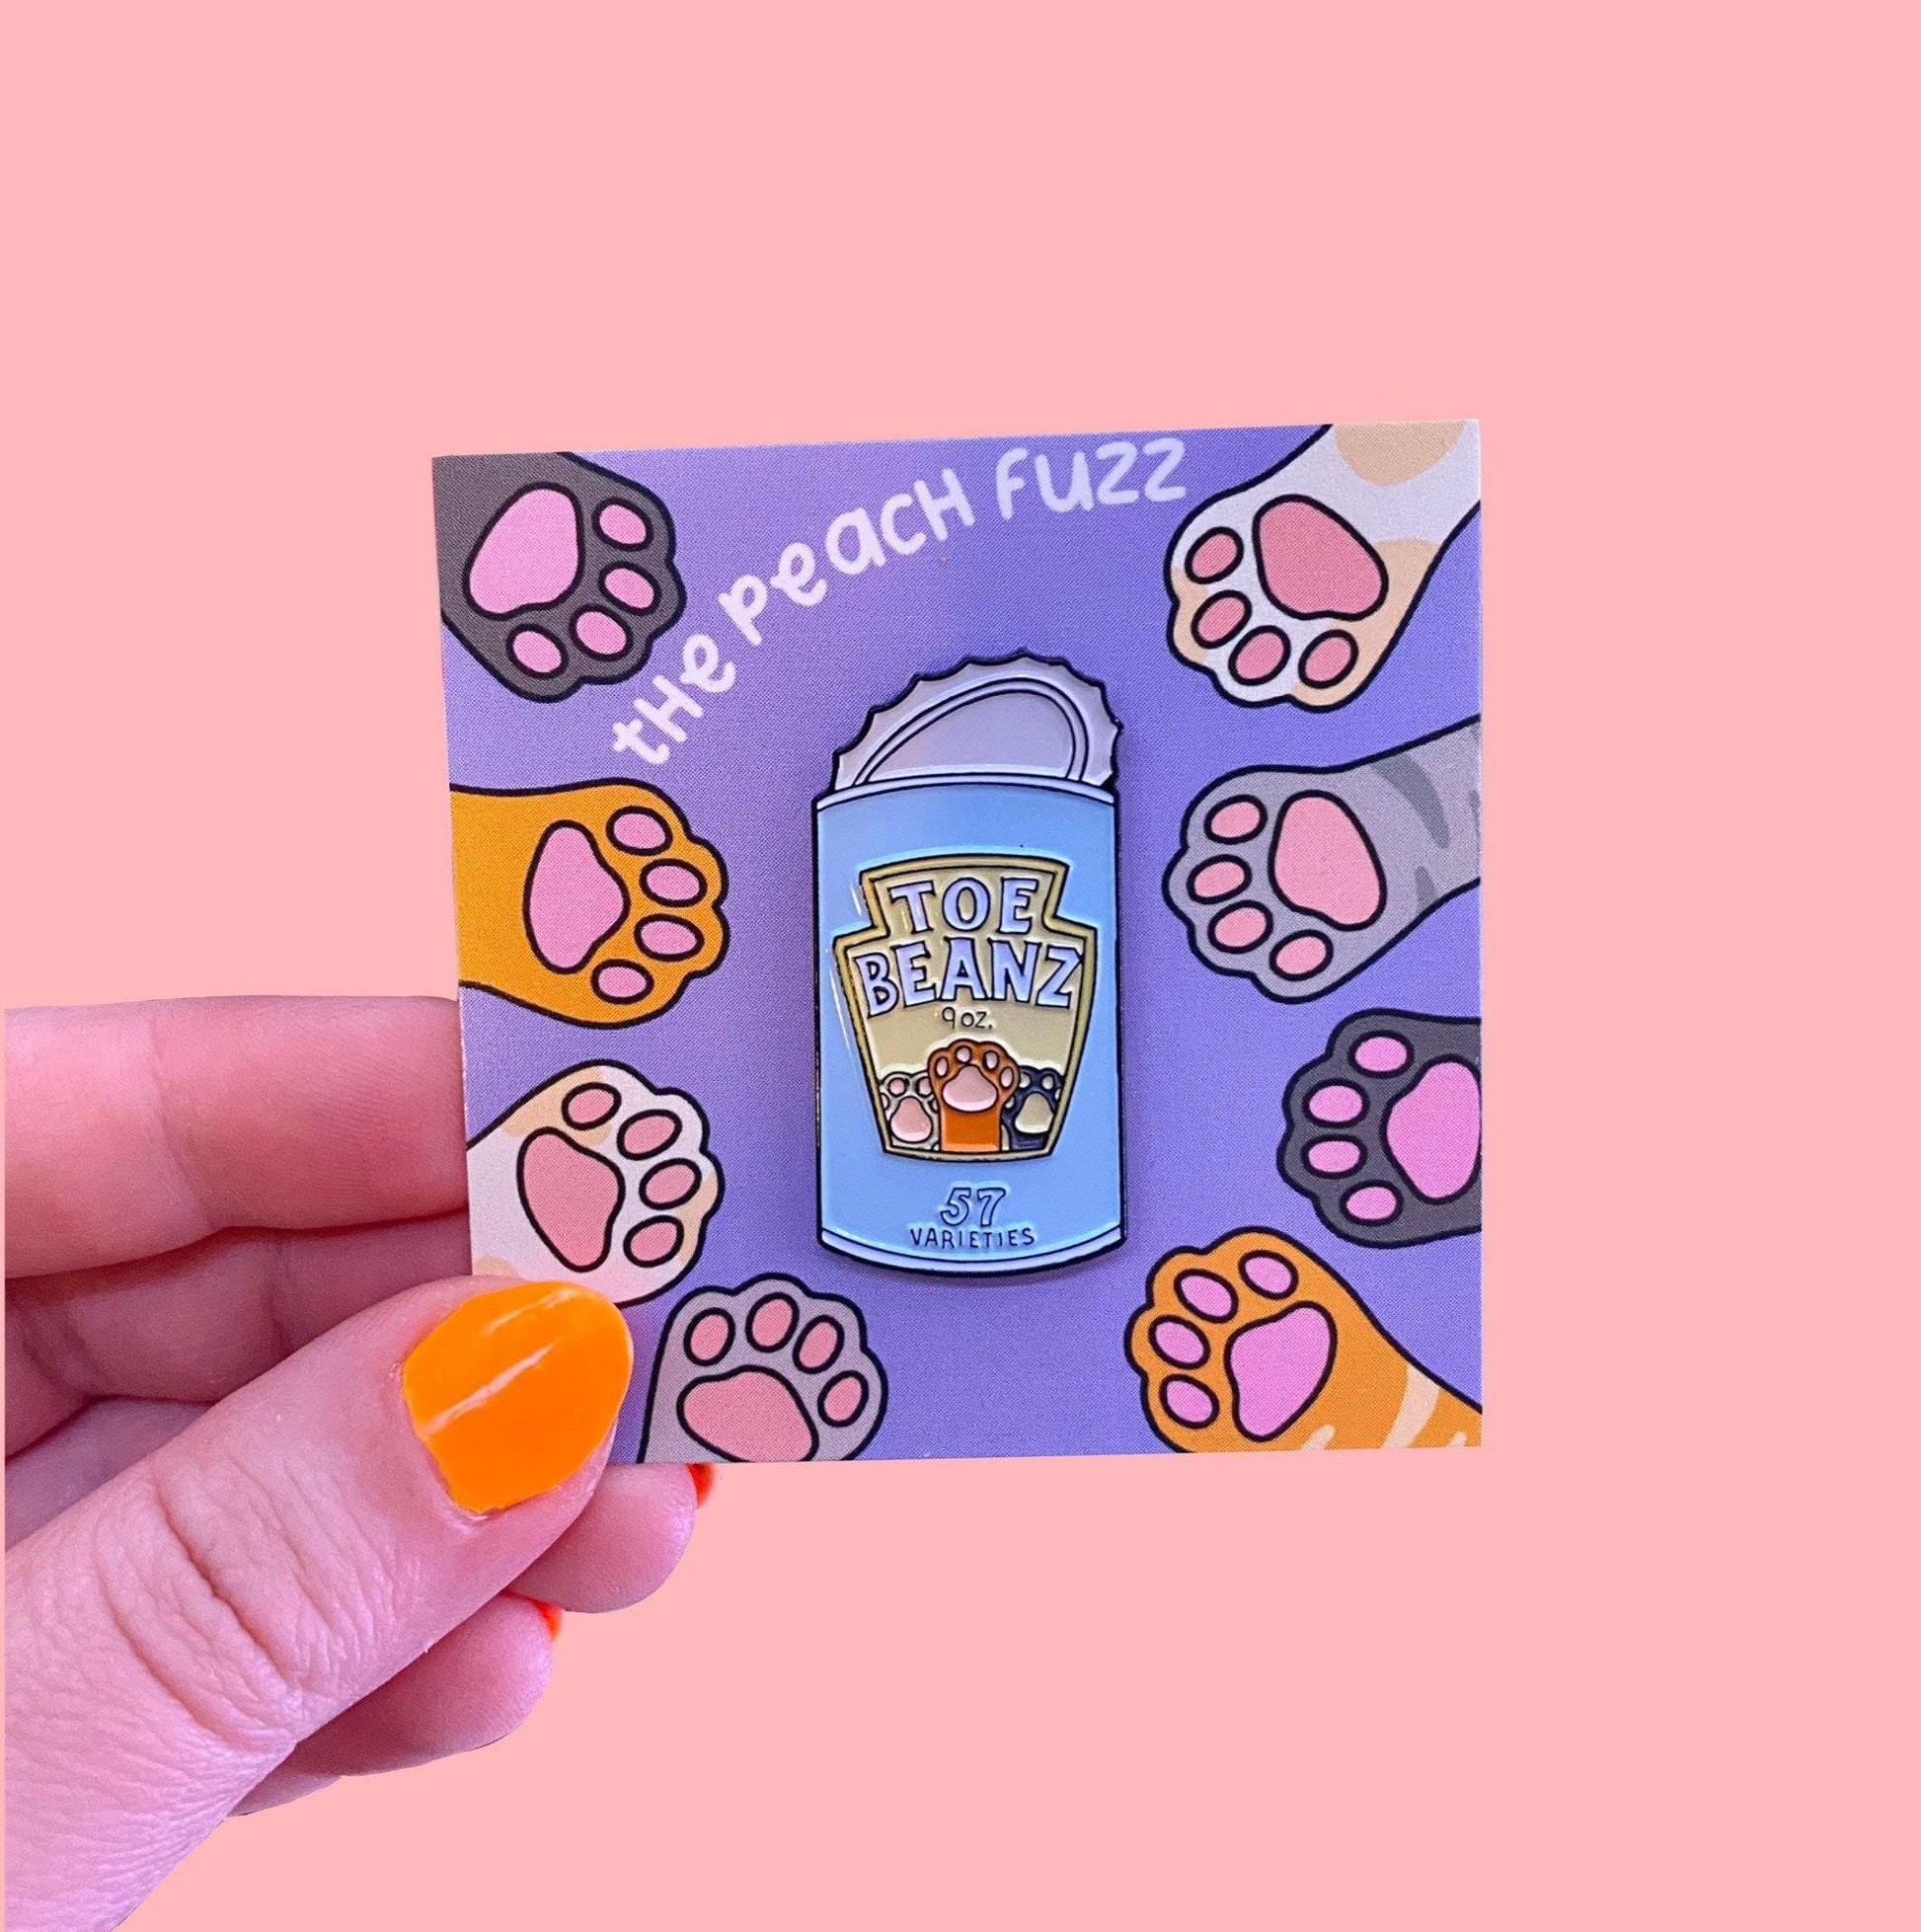 A soft enamel pin of a can of beans with the lid open and the label for the beans says “toe beans” with three little cat paws reaching up. The backing card has dark brown, yellow, white, orange, and gray cat paws reaching towards the center where the pin is.